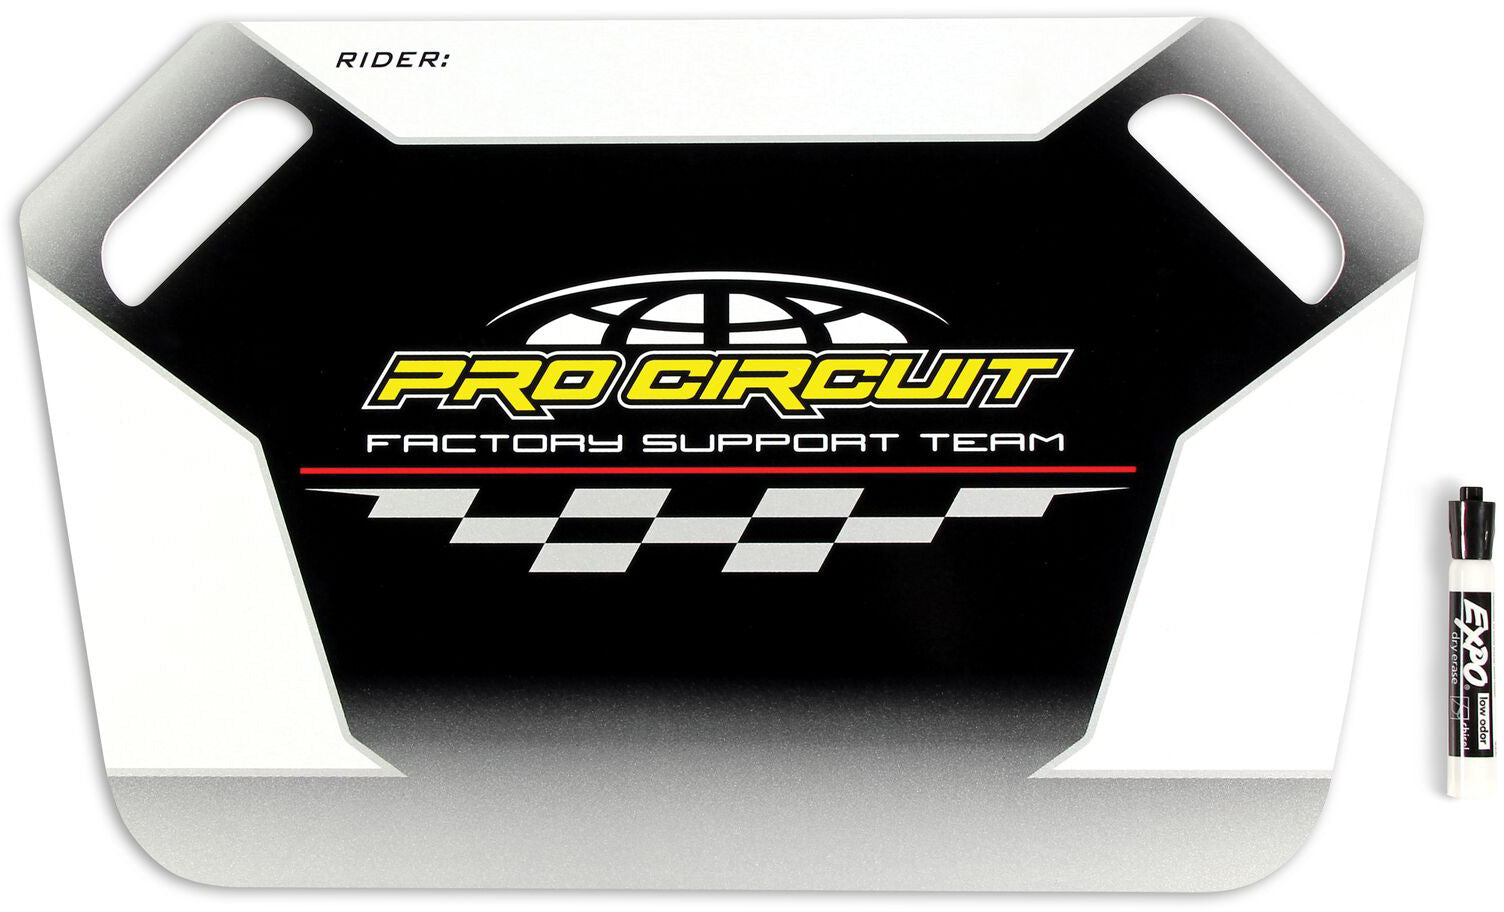 Pro Circuit Monster Pit Board with marker included, featuring prominent Monster Energy branding on a clear, easy-to-read display.